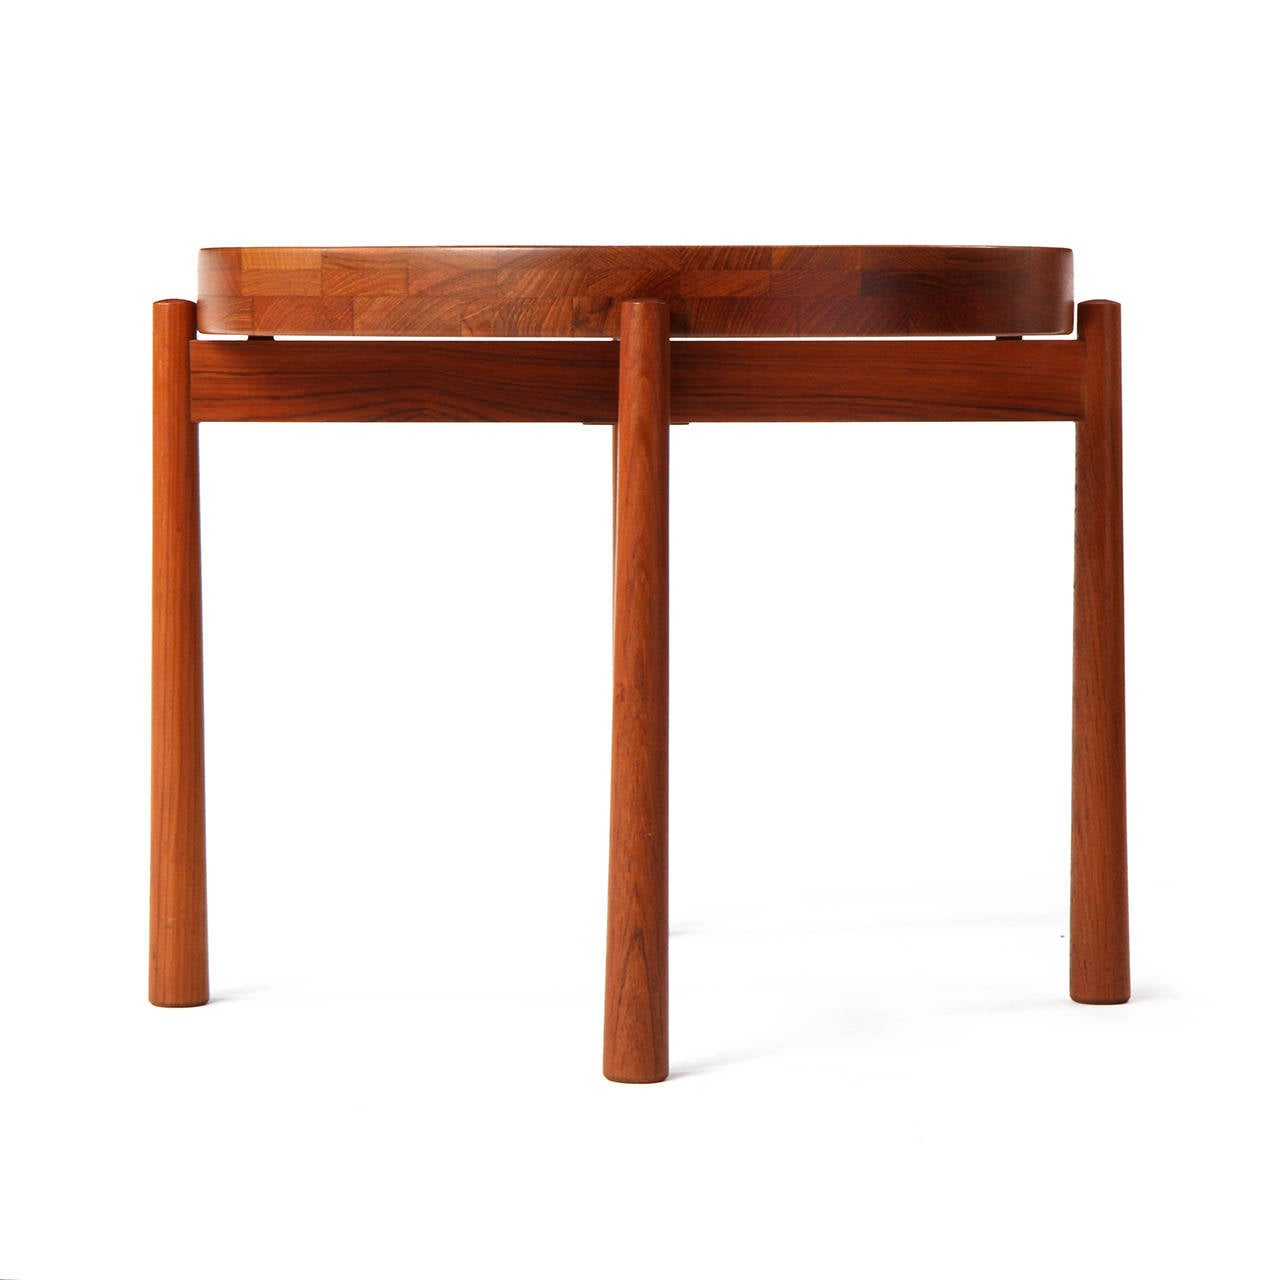 Mid-20th Century 1960s Danish Modern Tray Table by Jens Quistgaard for Richard Nissen For Sale